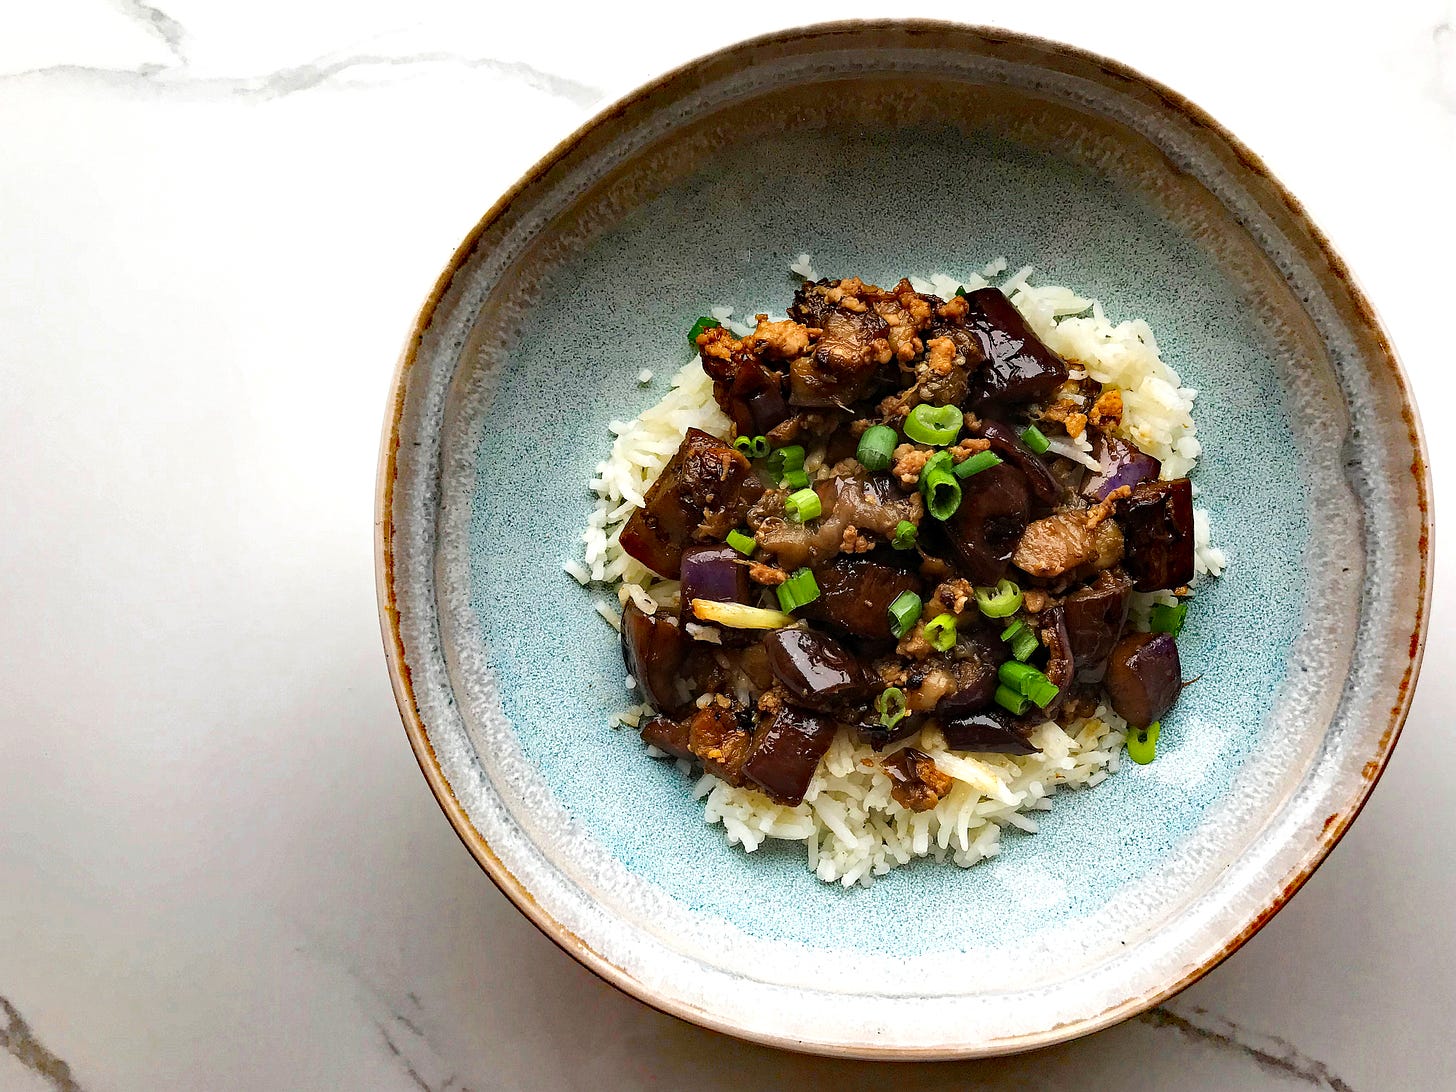 A blue stoneware bowl with rice and wok-fried aubergine with minced pork, topped with sliced green onions.